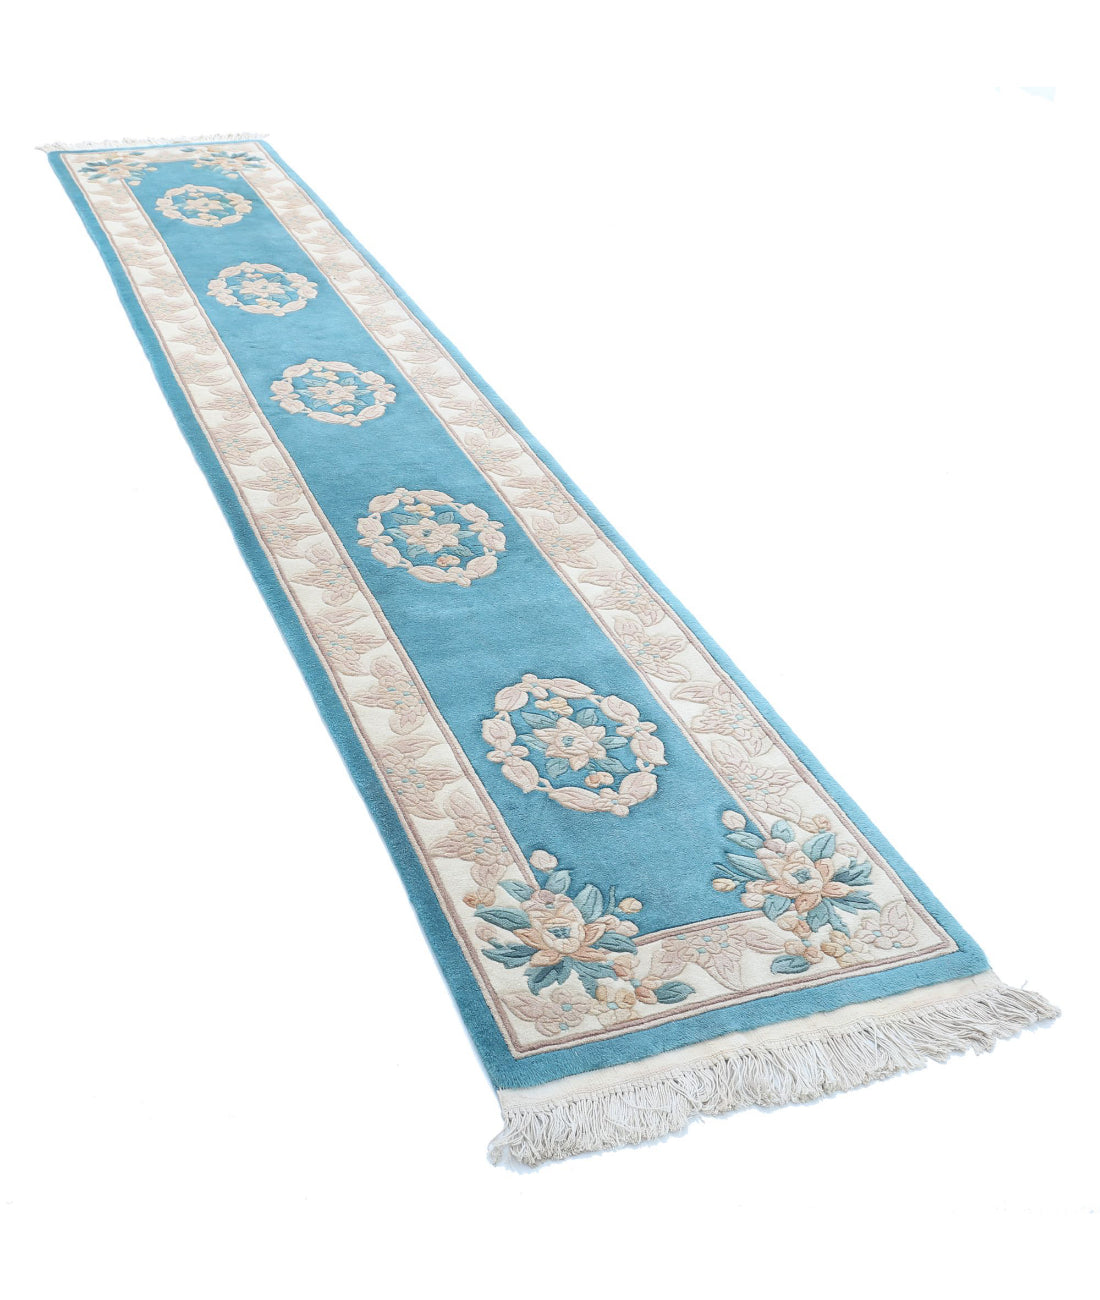 Chinese 2'3'' X 11'11'' Hand-Knotted Wool Rug 2'3'' x 11'11'' (68 X 358) / Blue / Ivory